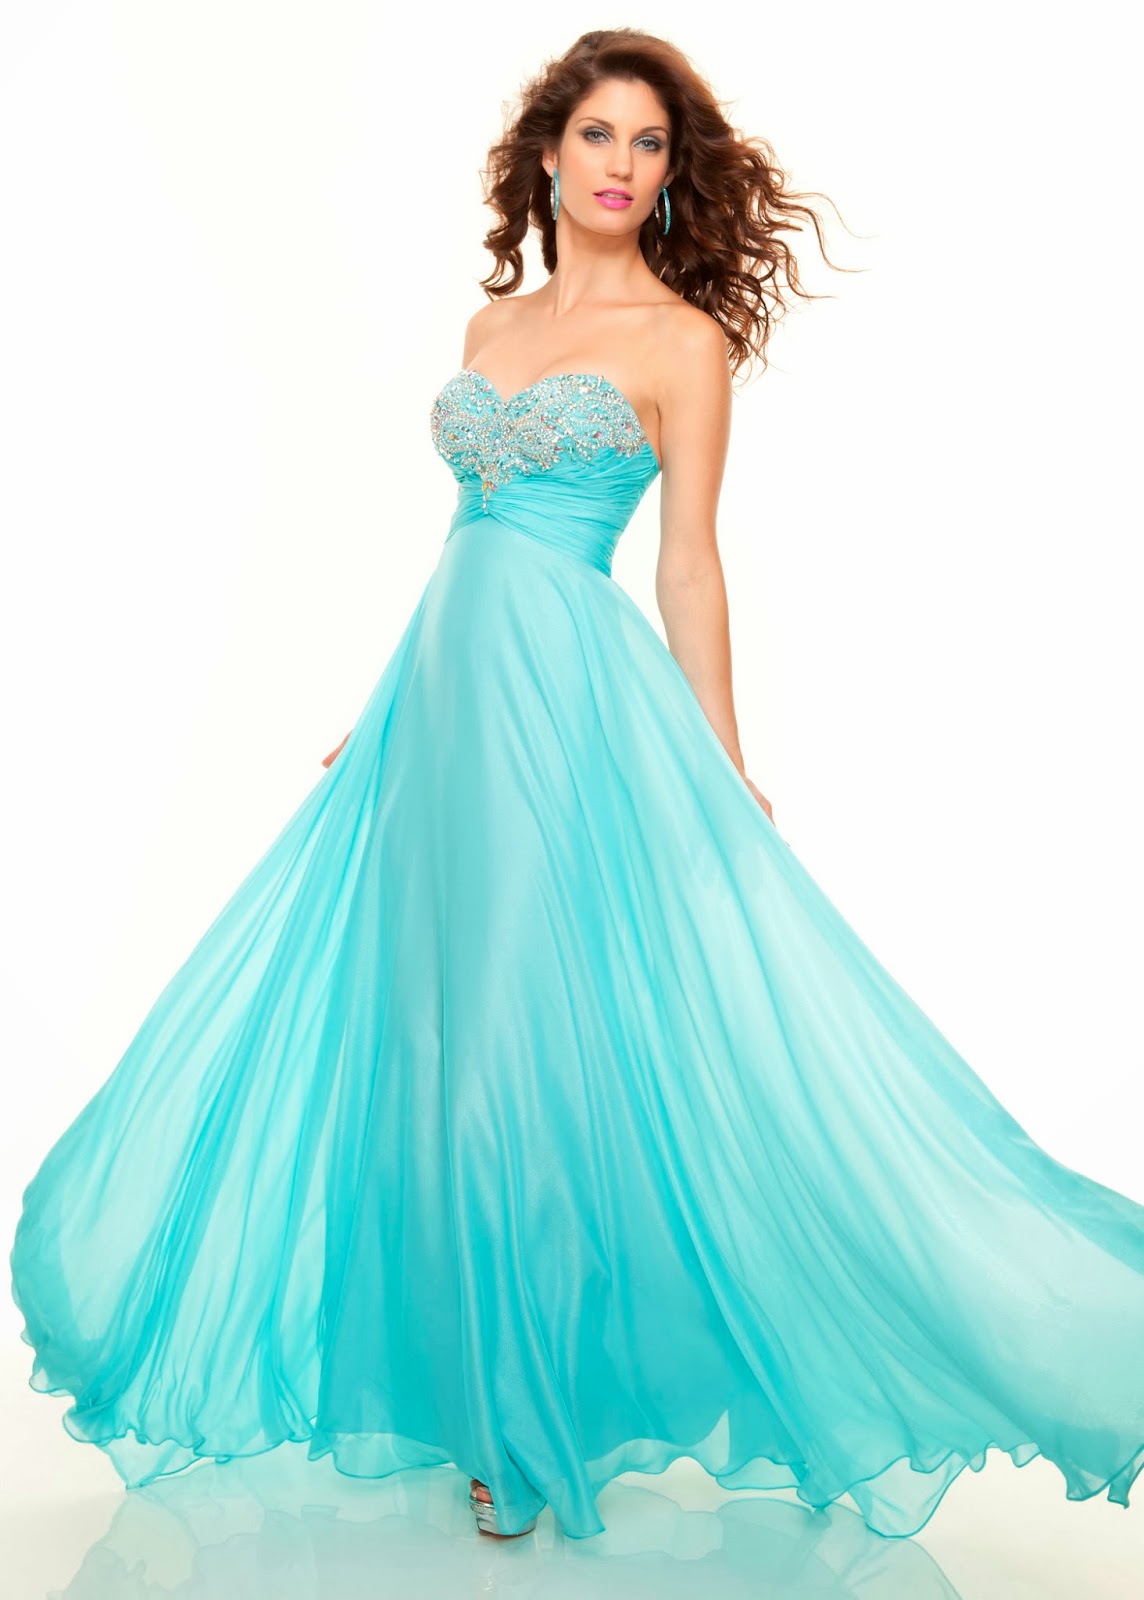 ... want to customize above gowns.More prom trend information,check here